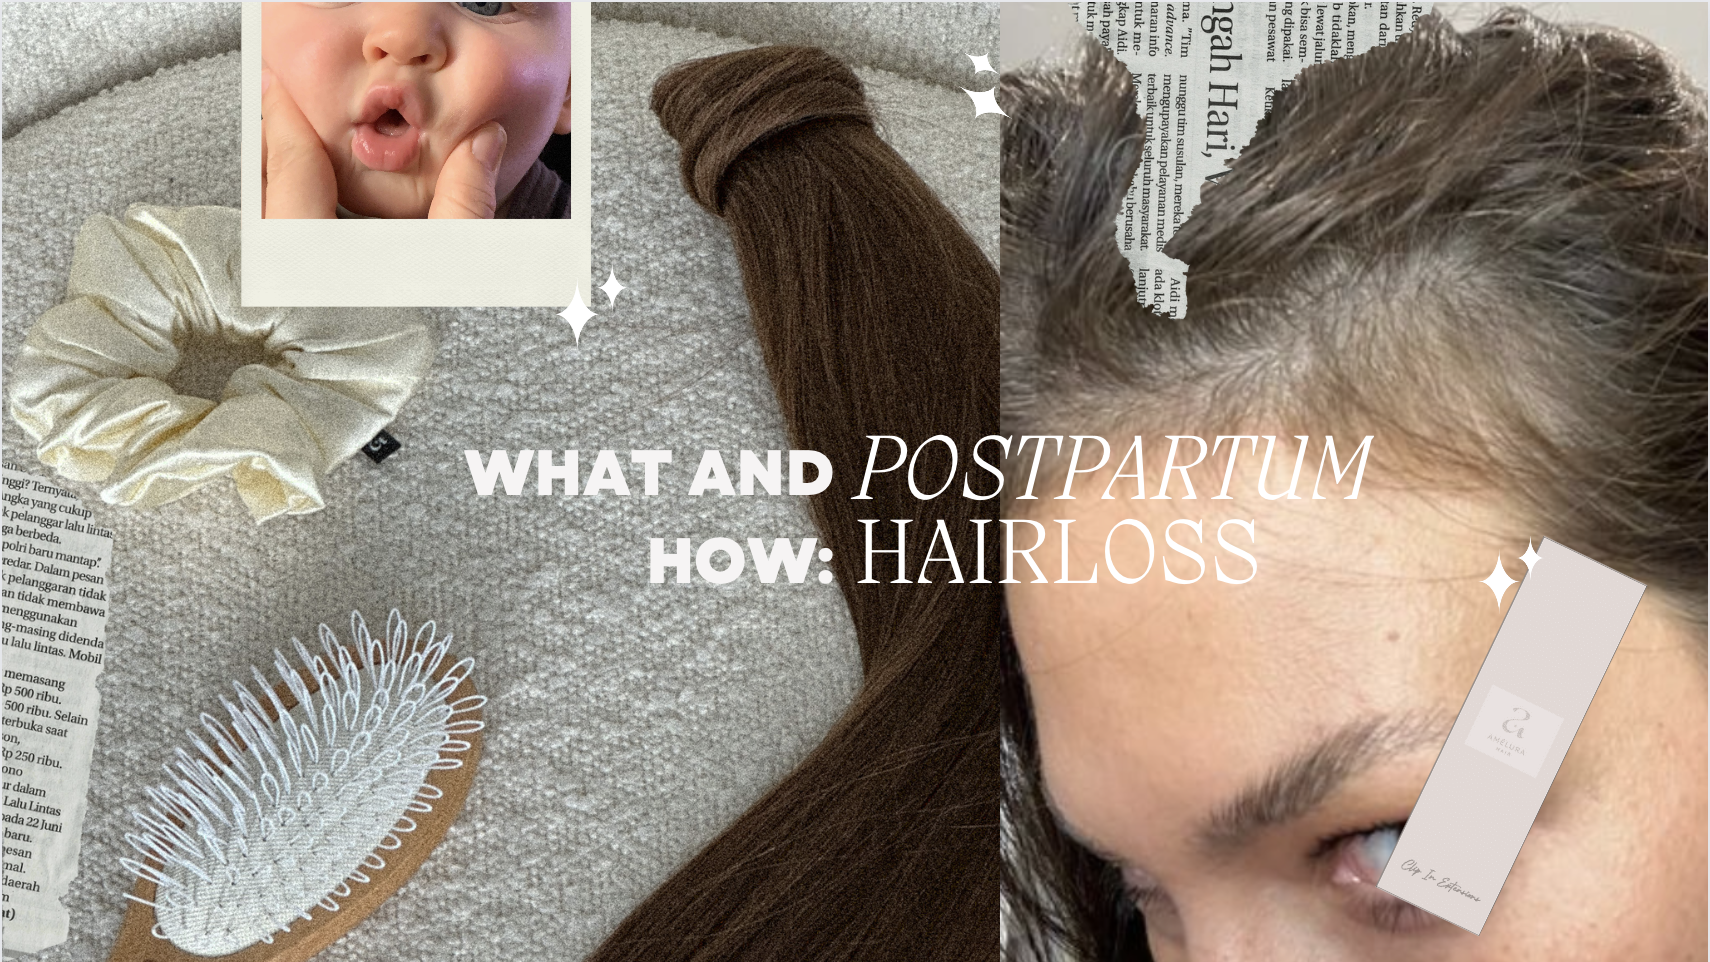 New Mom, New Hair: Understanding Postpartum Hair Loss and How to Handle It